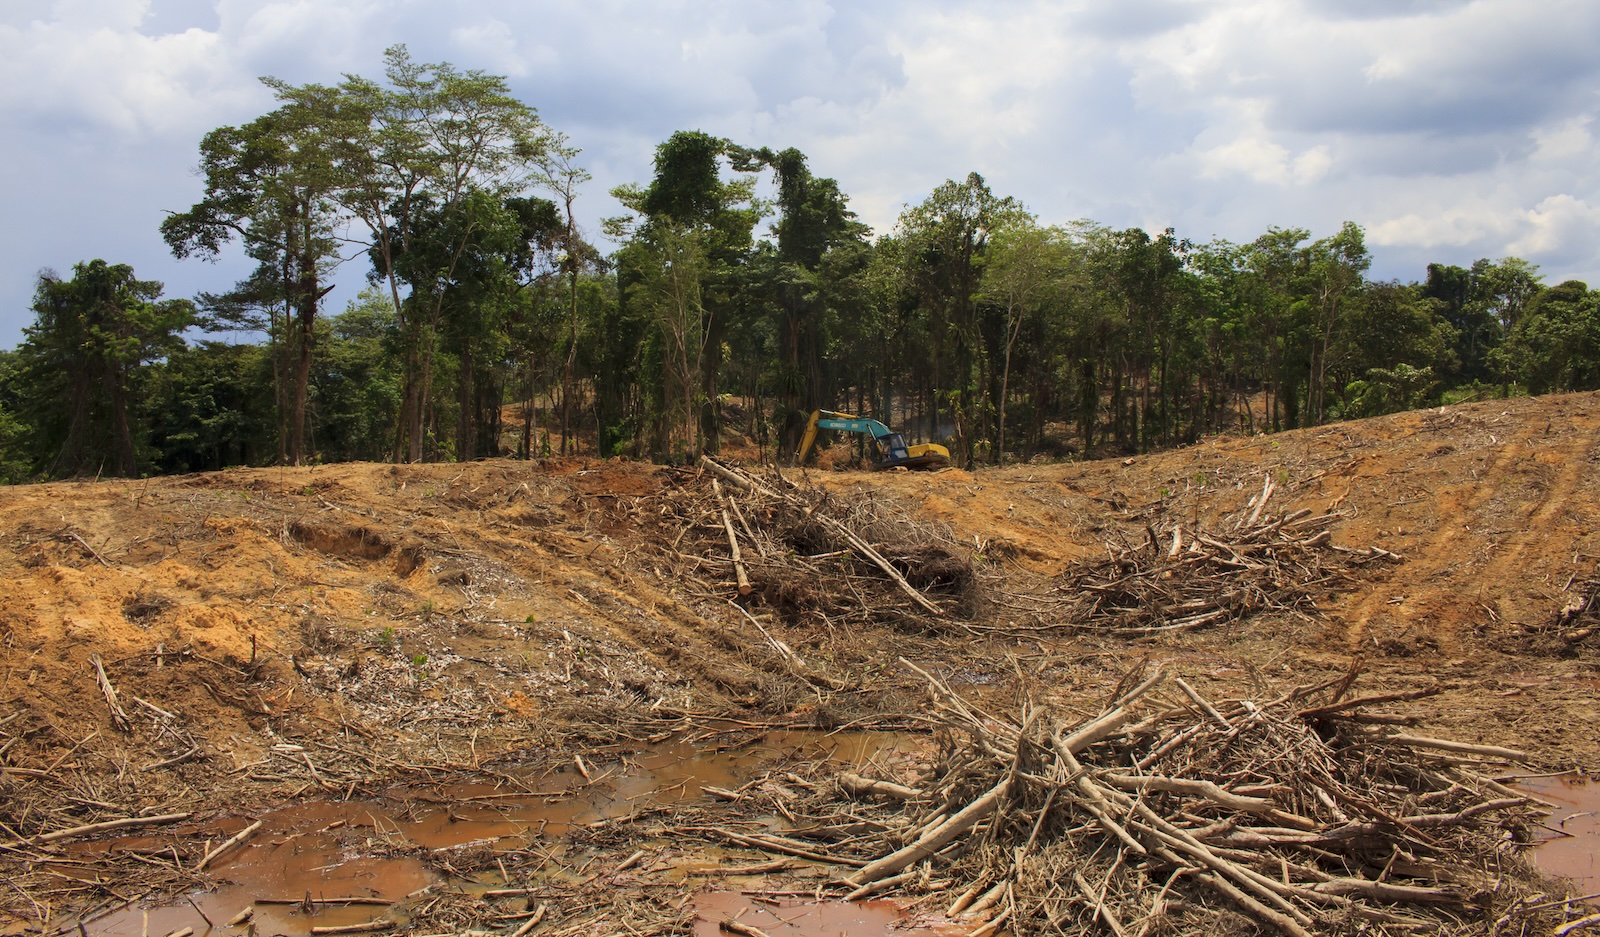 Rainforest is destroyed to make way for palm oil plantations in Borneo, Malaysia.